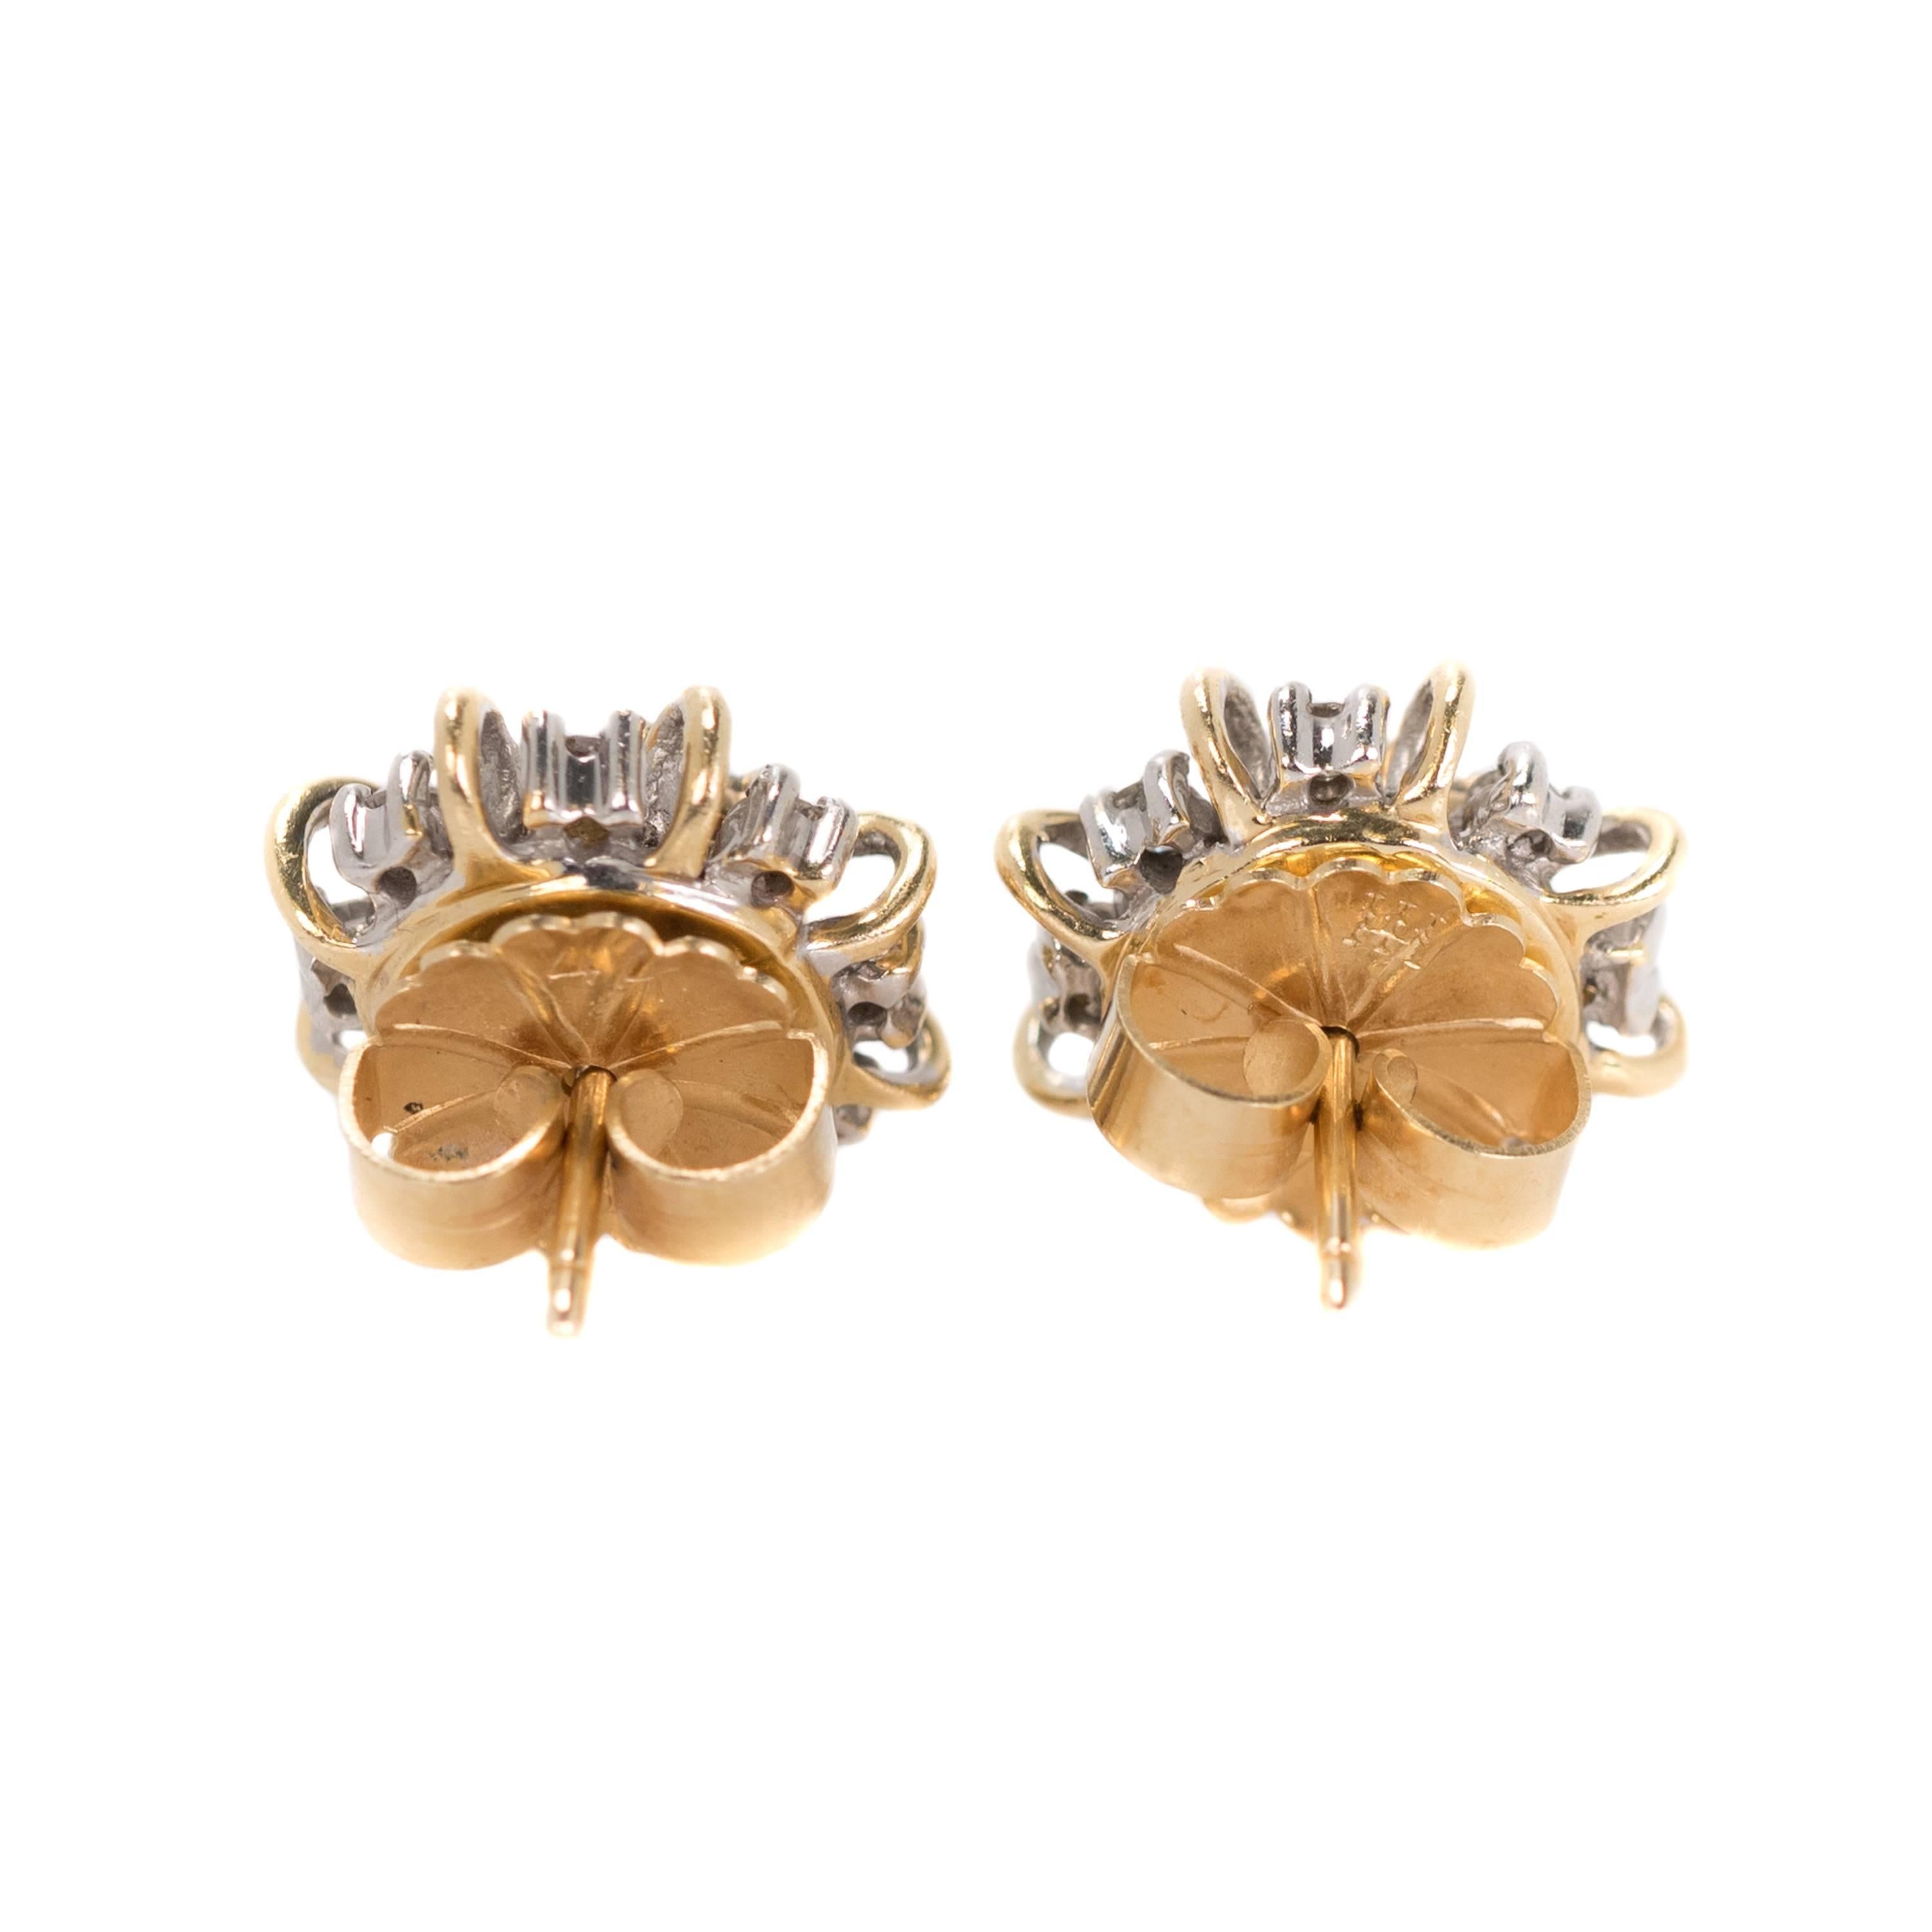 Retro 1950s 1 Carat Total Diamond Earrings with Jackets